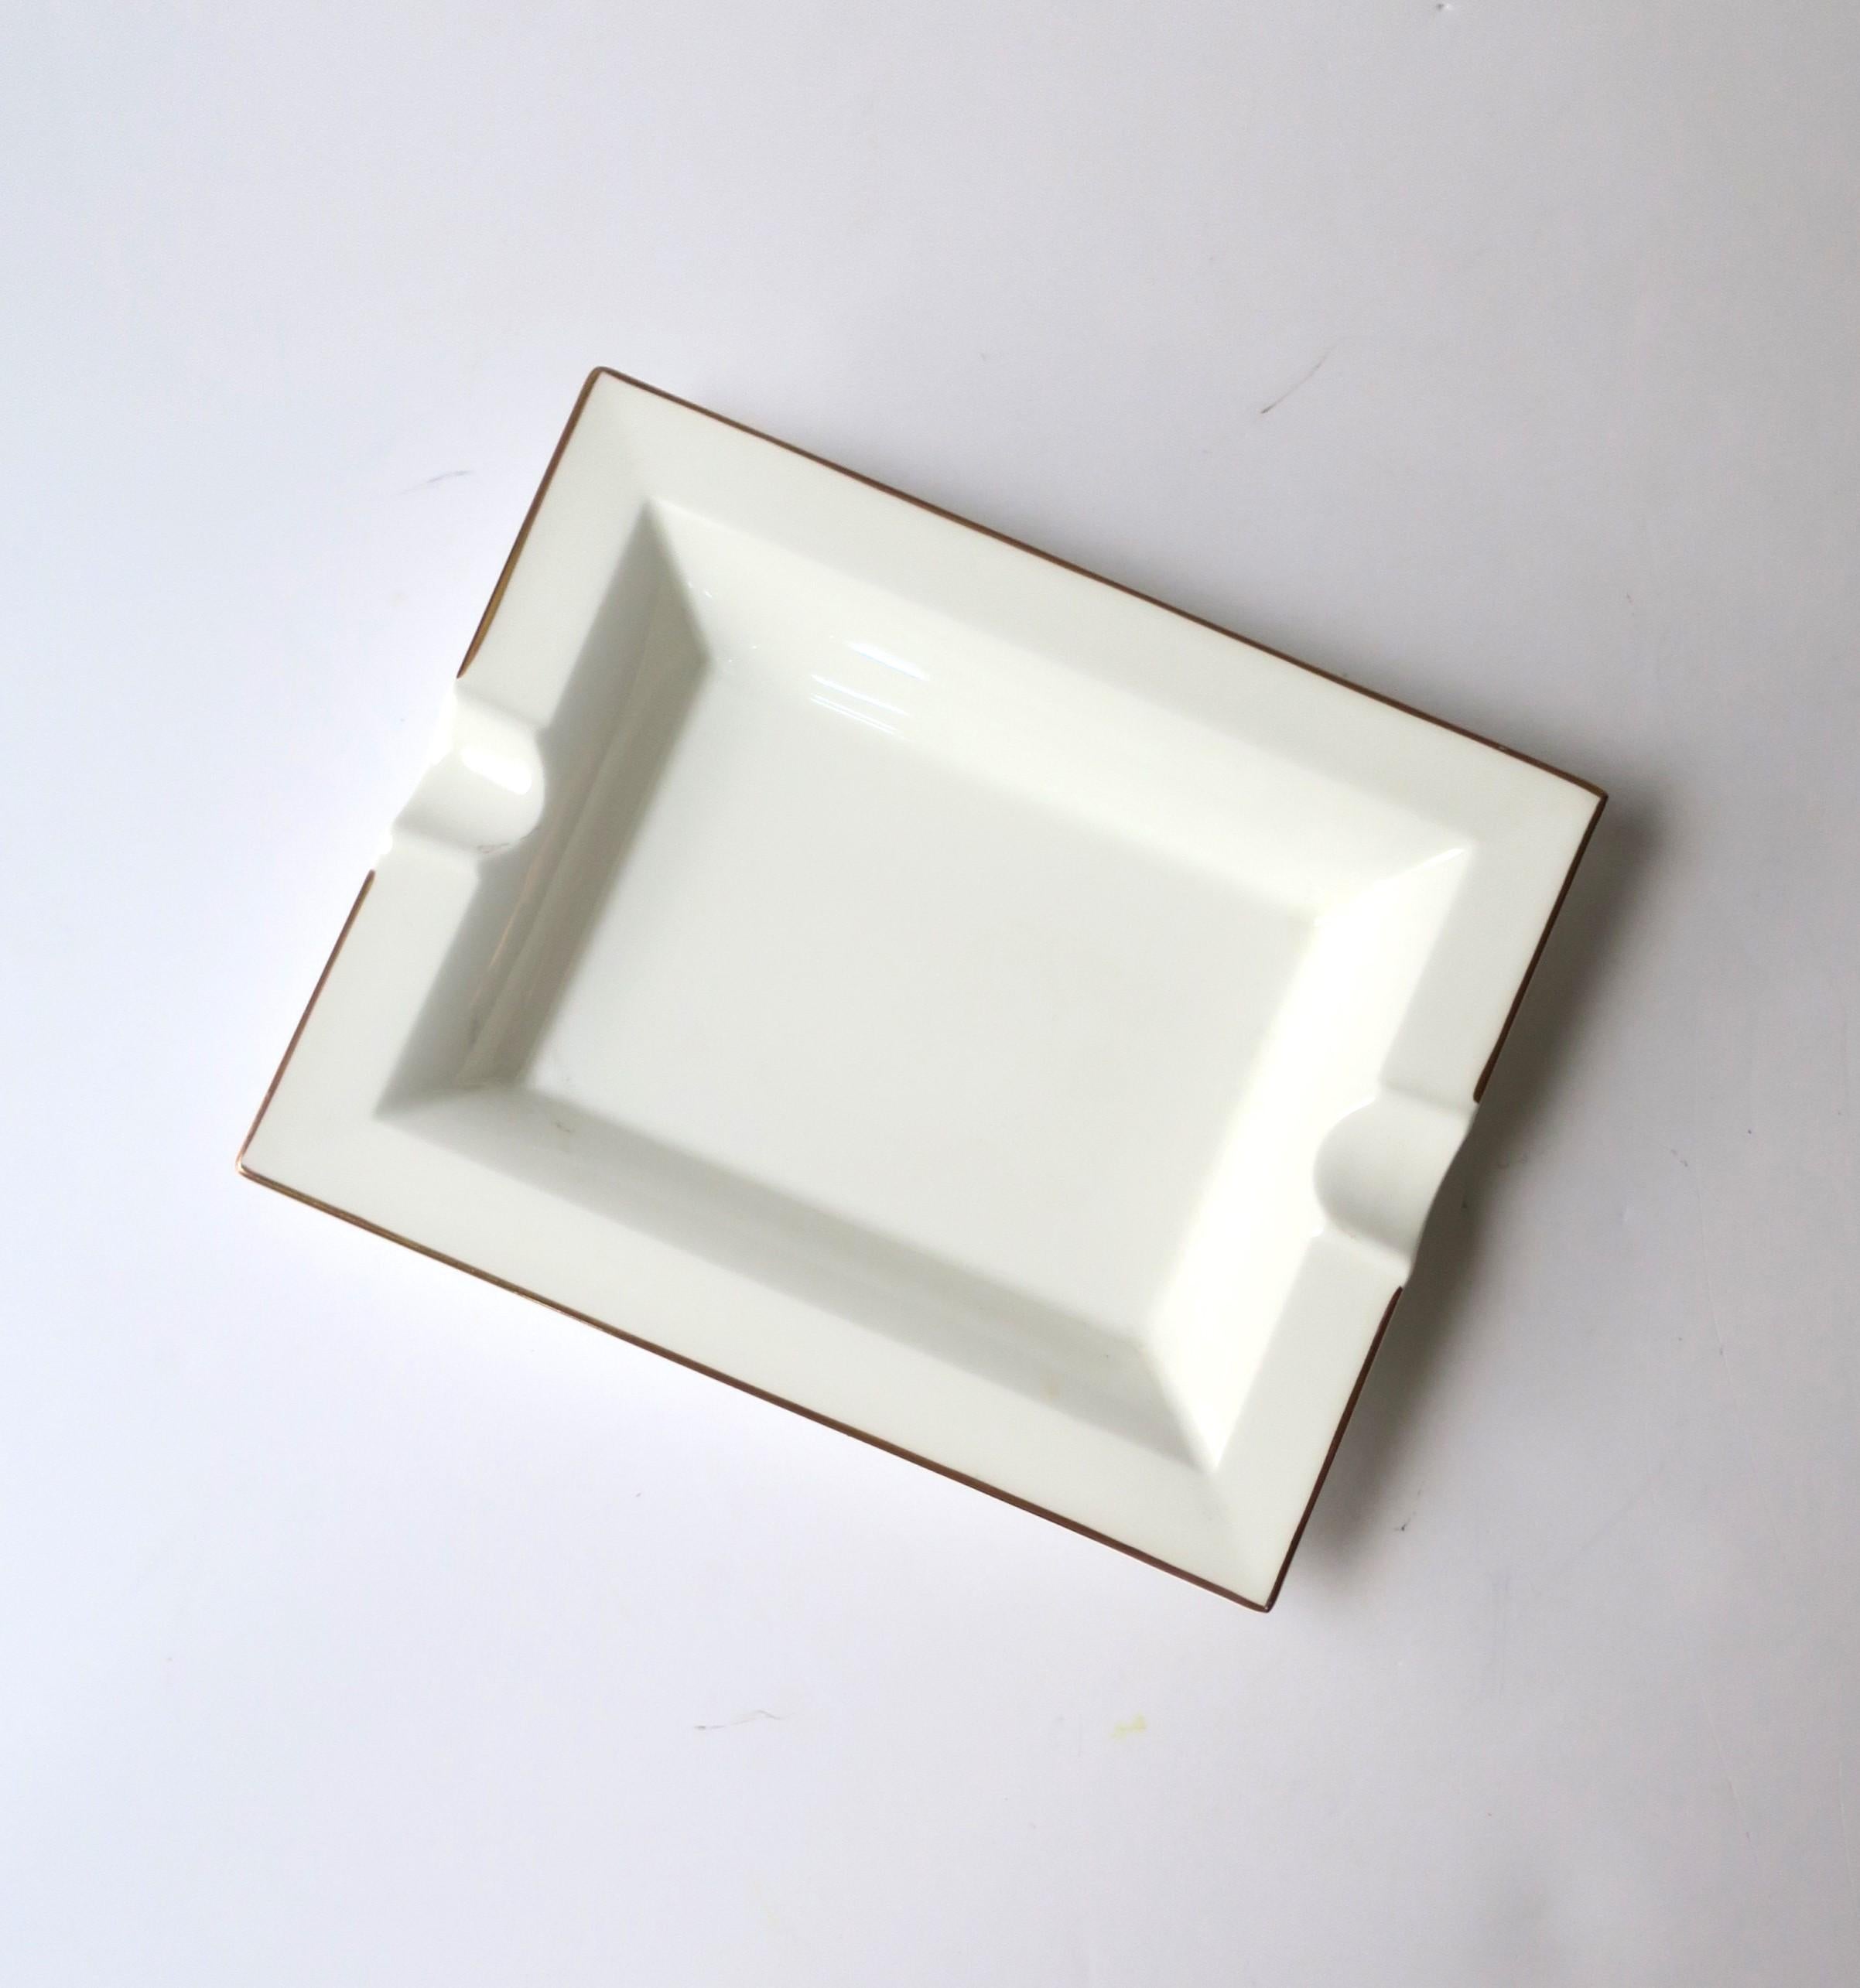 A German white porcelain tray vide-poche (catch-all) or ashtray with gold edge, circa late-20th century, Germany. A great standalone piece/tray to hold jewelry (as demonstrated) or other items on desk, vanity, nightstand, end table, etc. Or use for